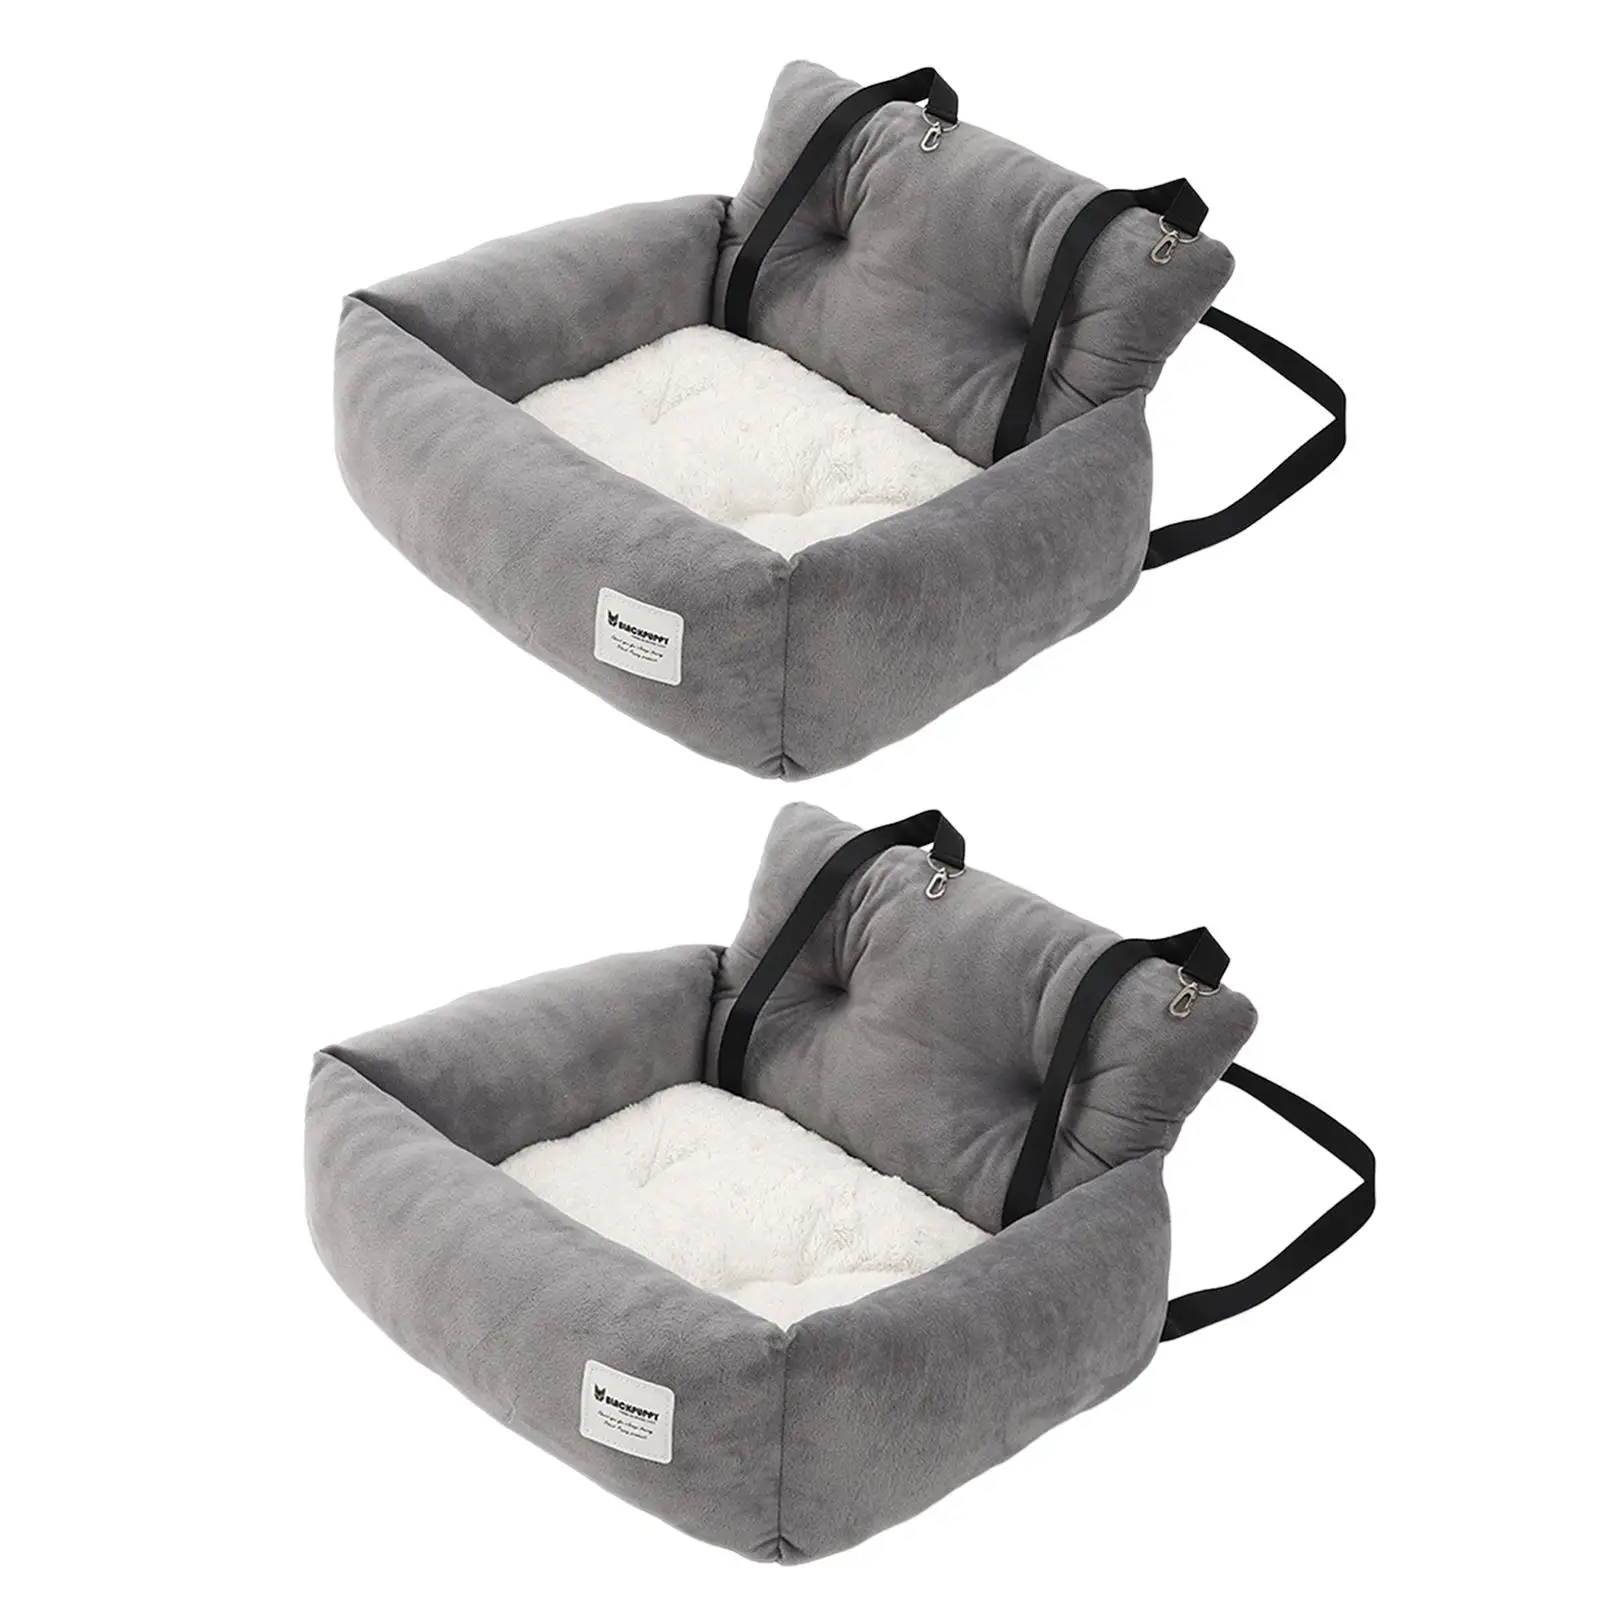 Dog Car SUV Seat Puppy Bed with Fixed Strap Convenient Assemble Anti Slip Bottom Multipurpose Adjustable Strap for Traveling